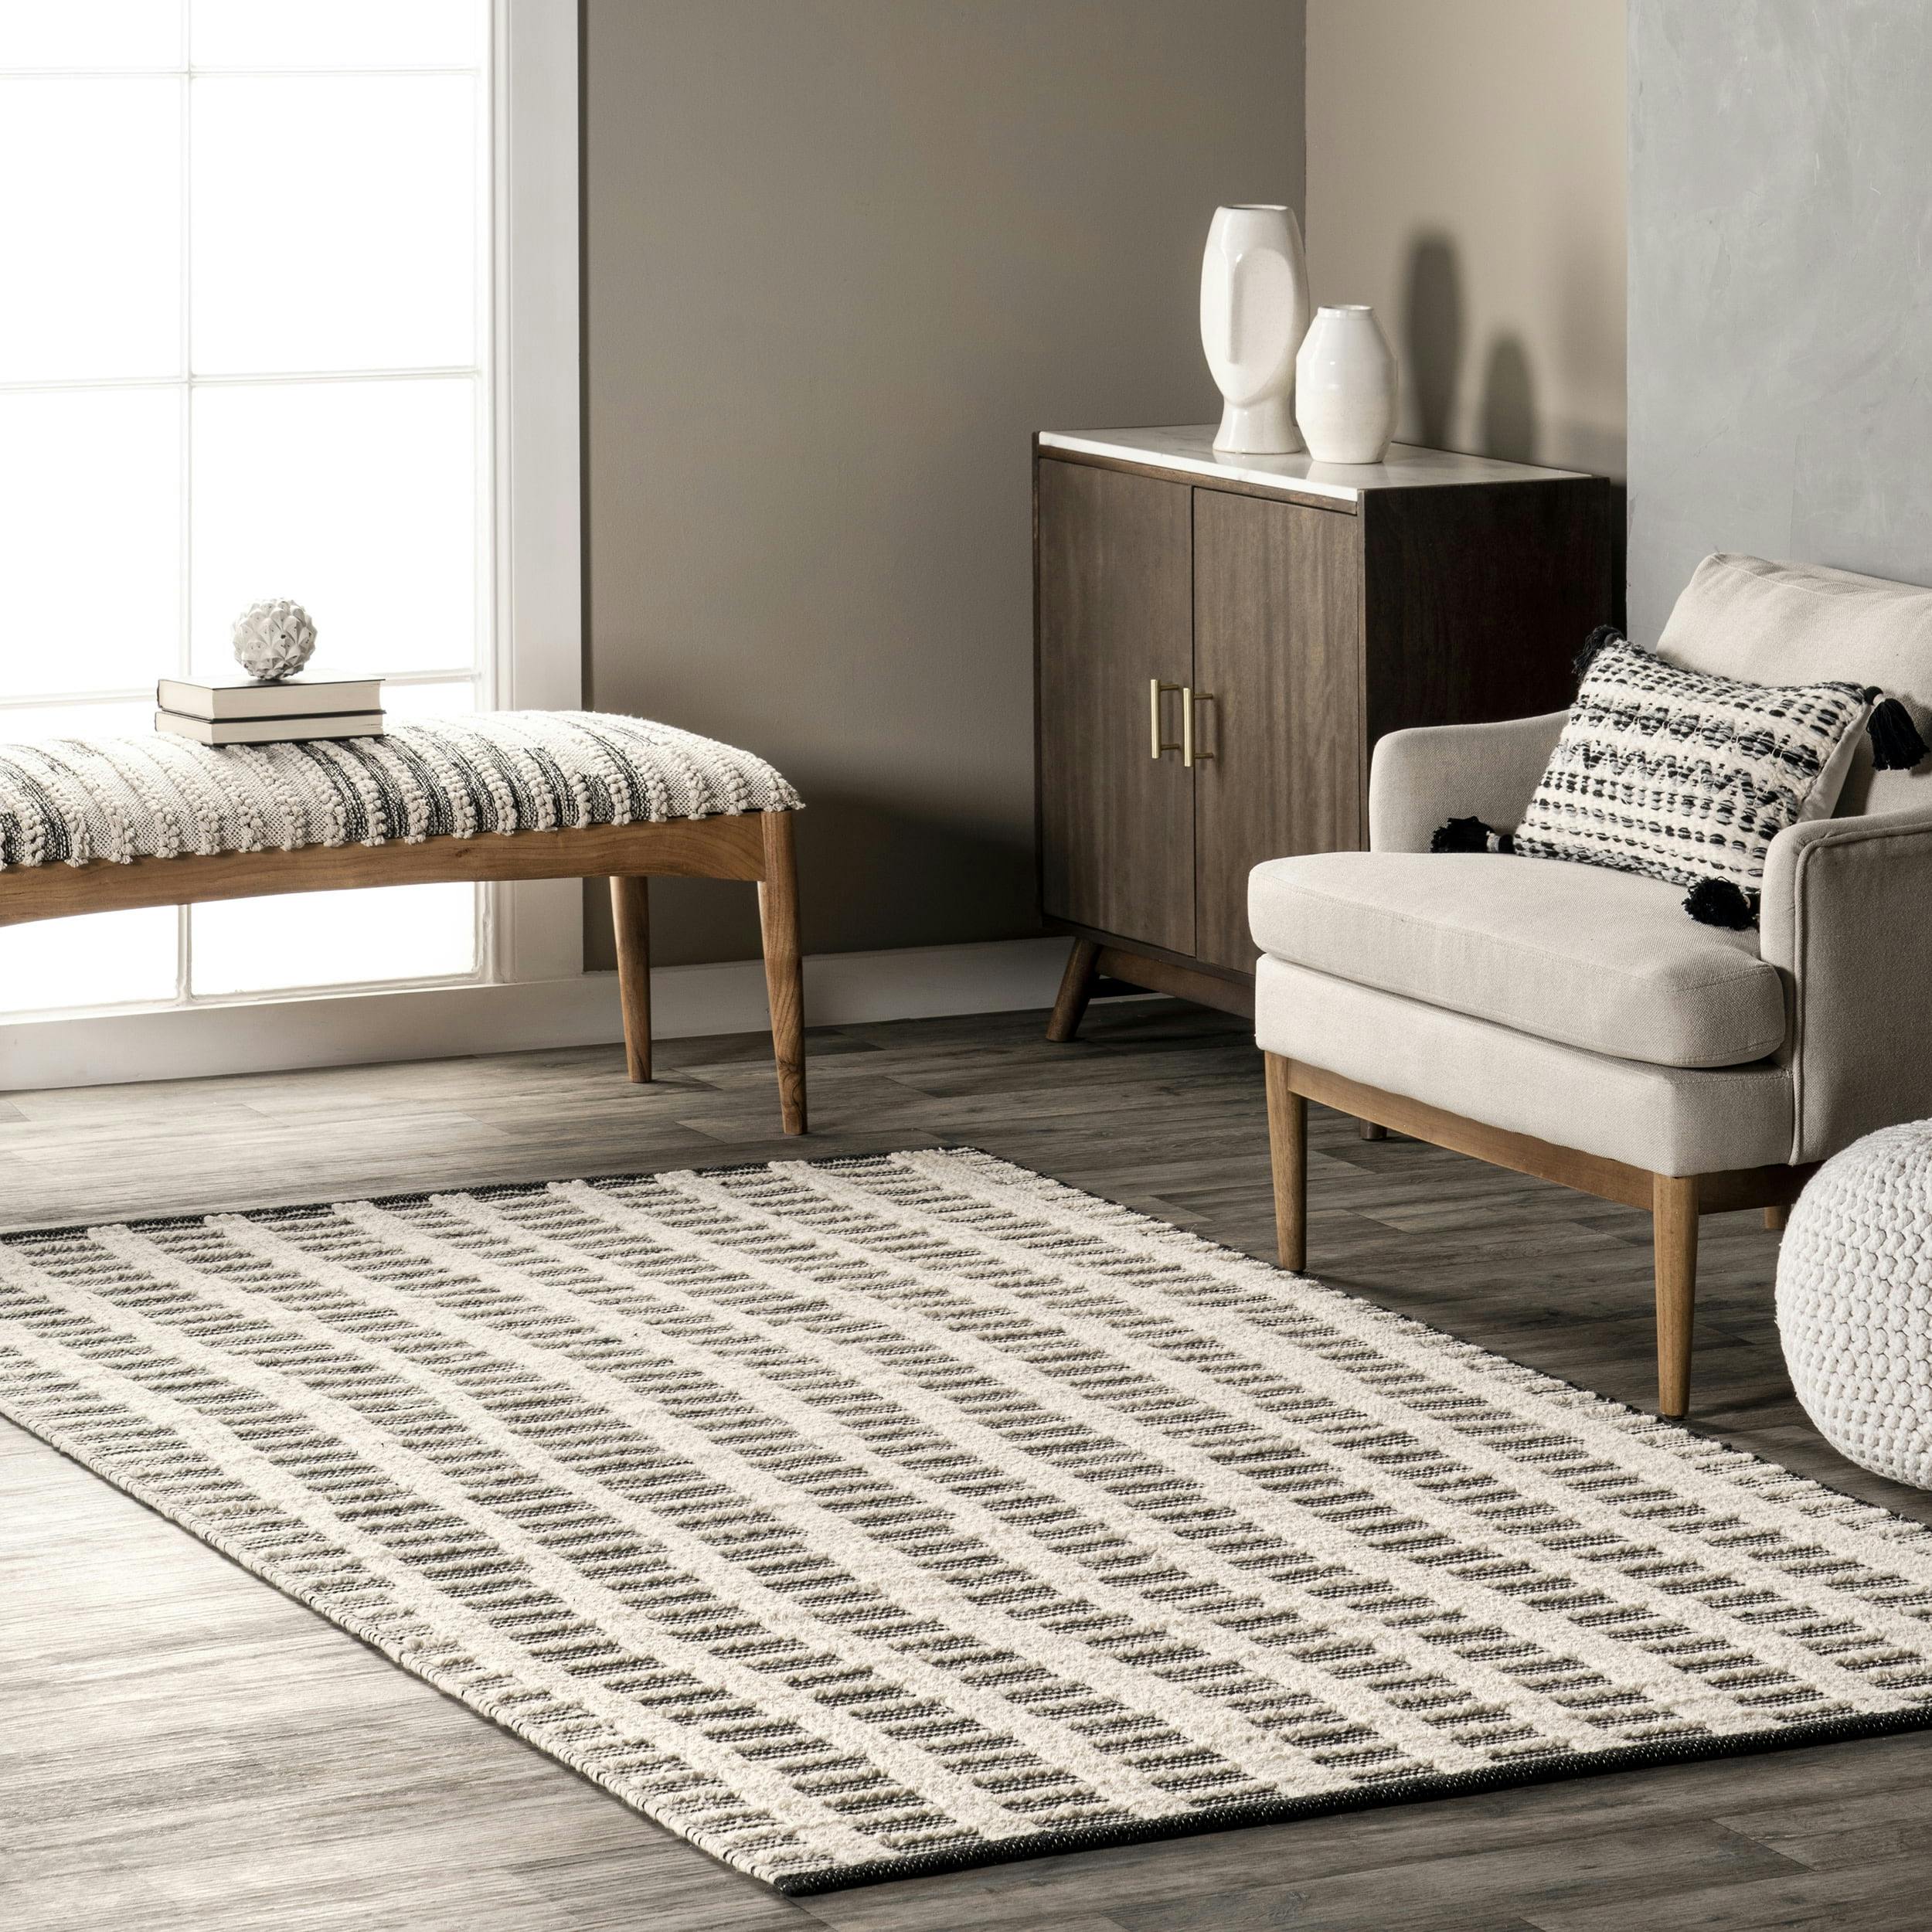 Parker Check 5'x8' Ivory Textured Wool Blend Area Rug